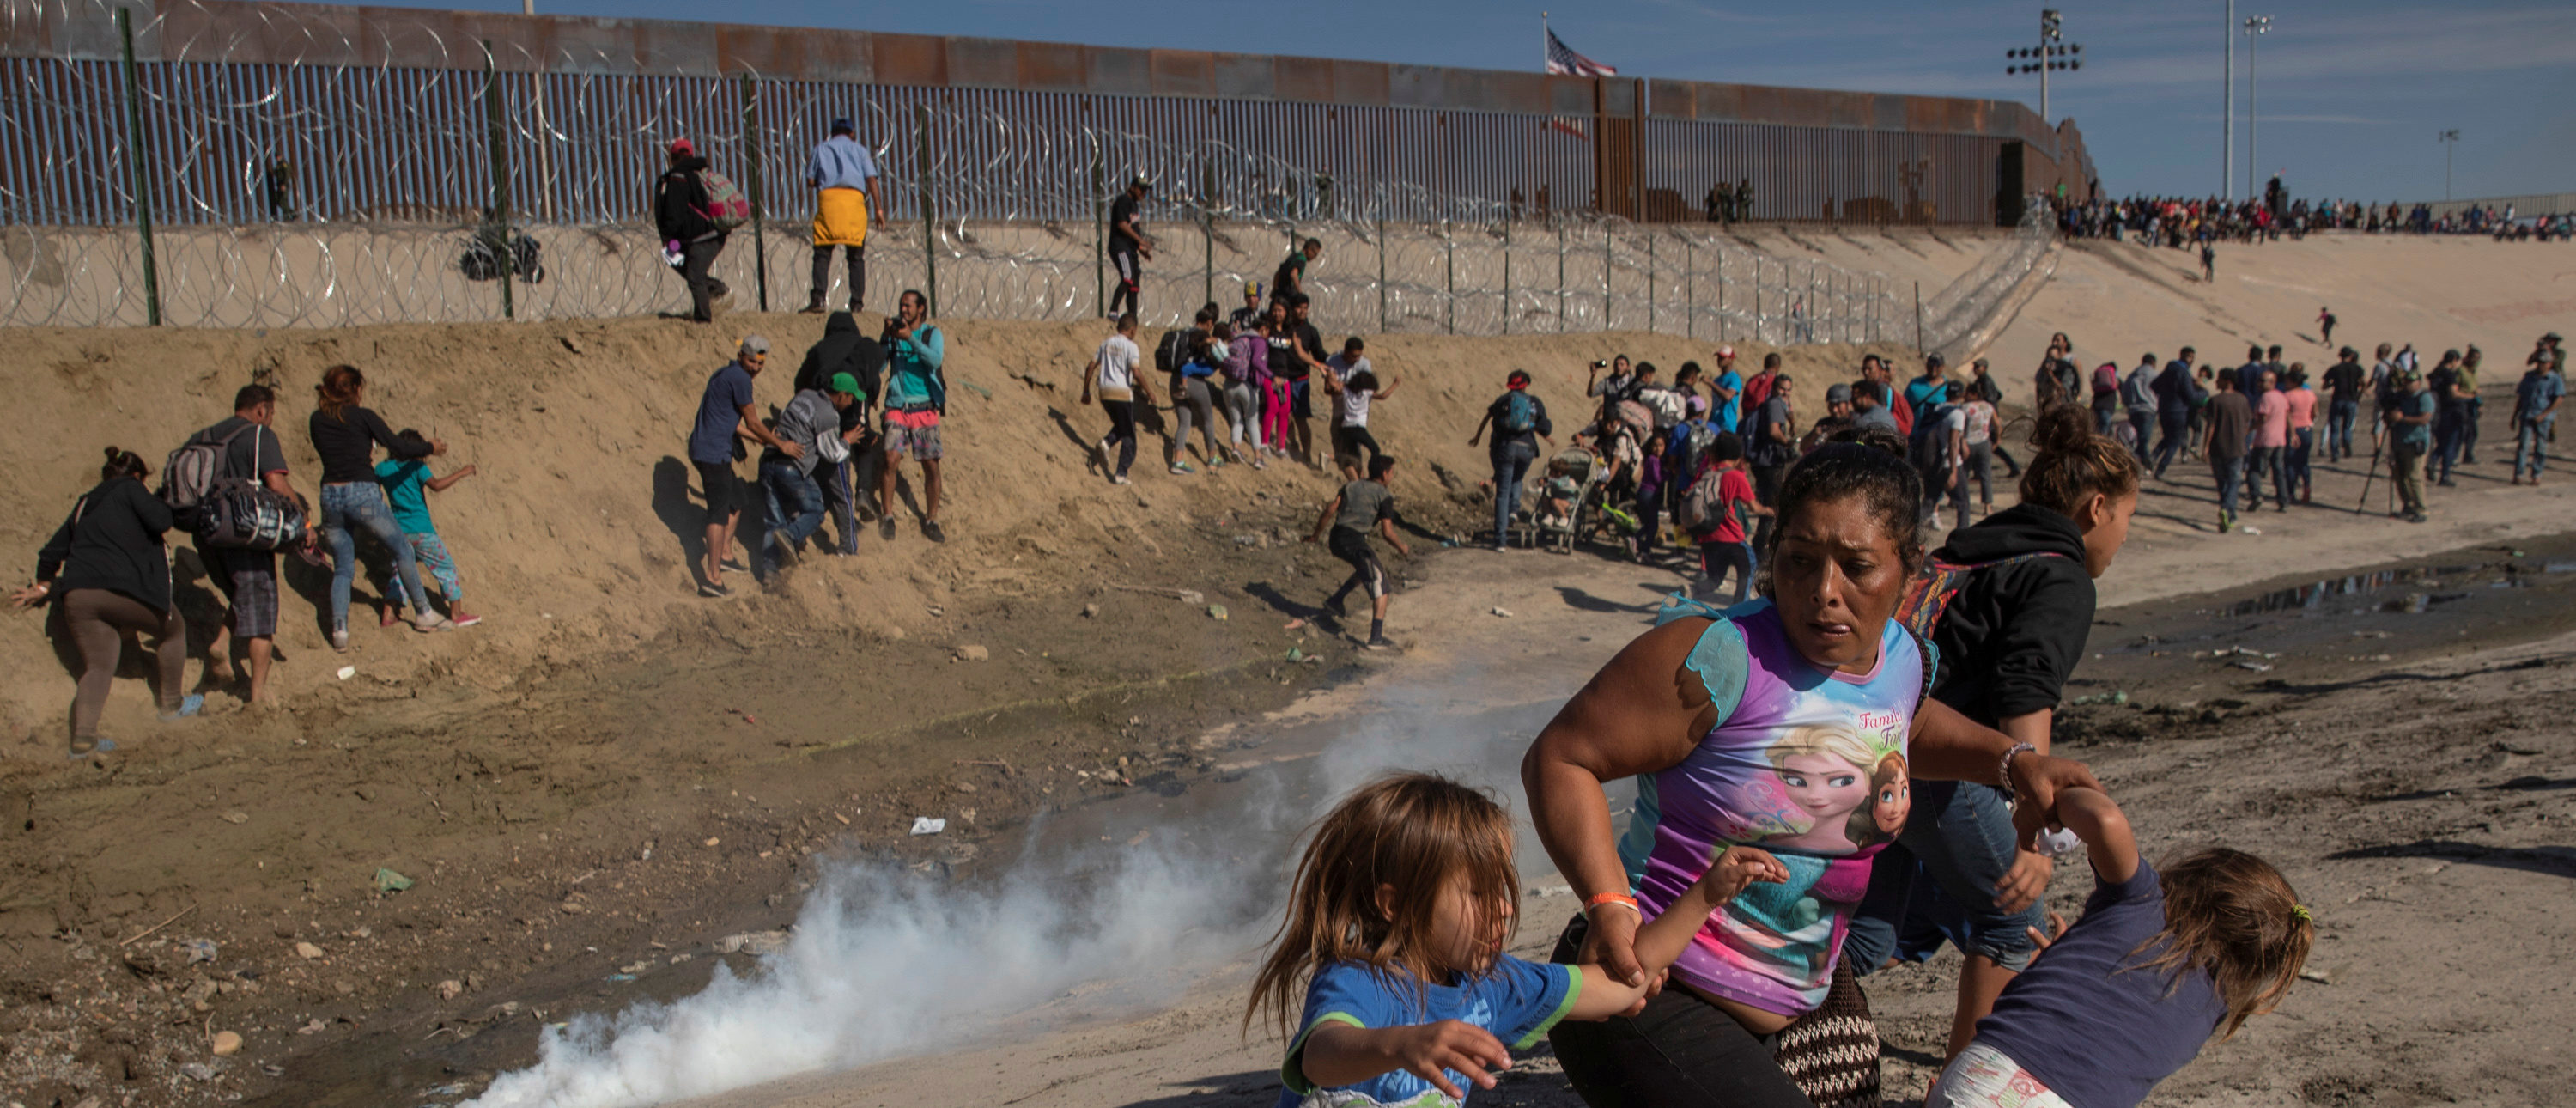 Maria Meza, a 40-year-old migrant woman from Honduras, part of a caravan of thousands from Central America trying to reach the United States, runs away from tear gas with her five-year-old twin daughters Saira Mejia Meza (L) and Cheili Mejia Meza (R) in front of the border wall between the U.S and Mexico, in Tijuana, Mexico November 25, 2018. REUTERS/Kim Kyung-hoon